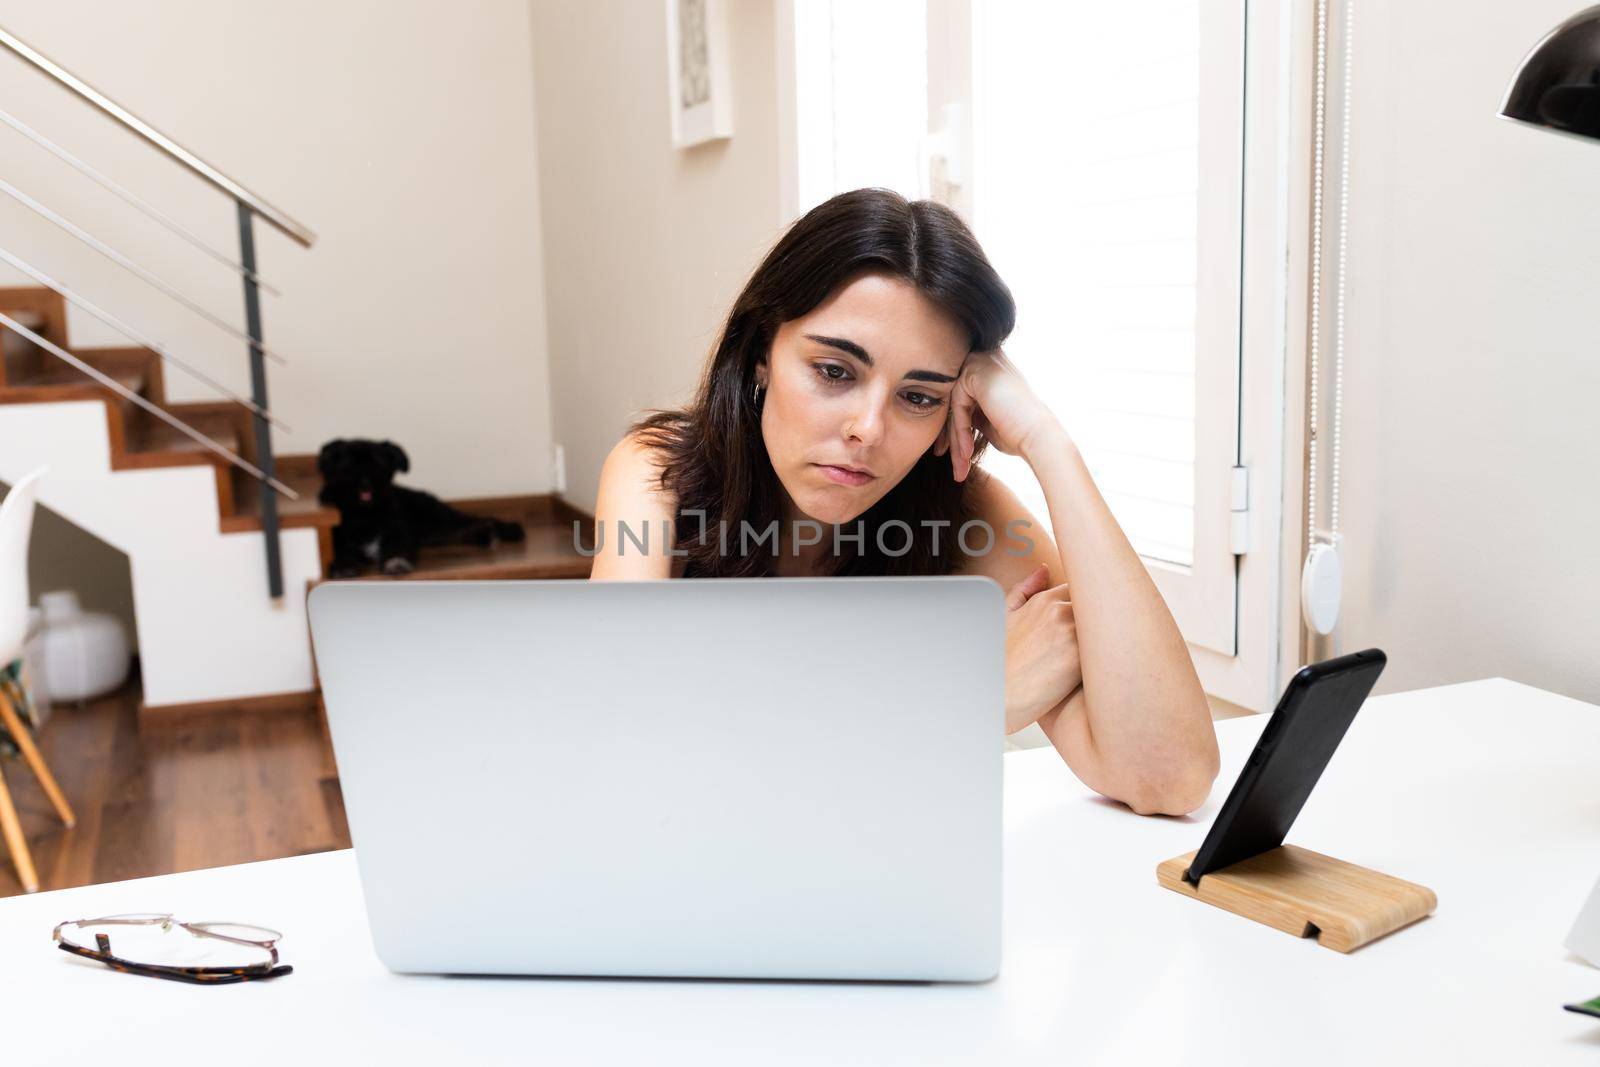 Young caucasian woman bored and frustrated in front of laptop working at home. Lifestyle concept.